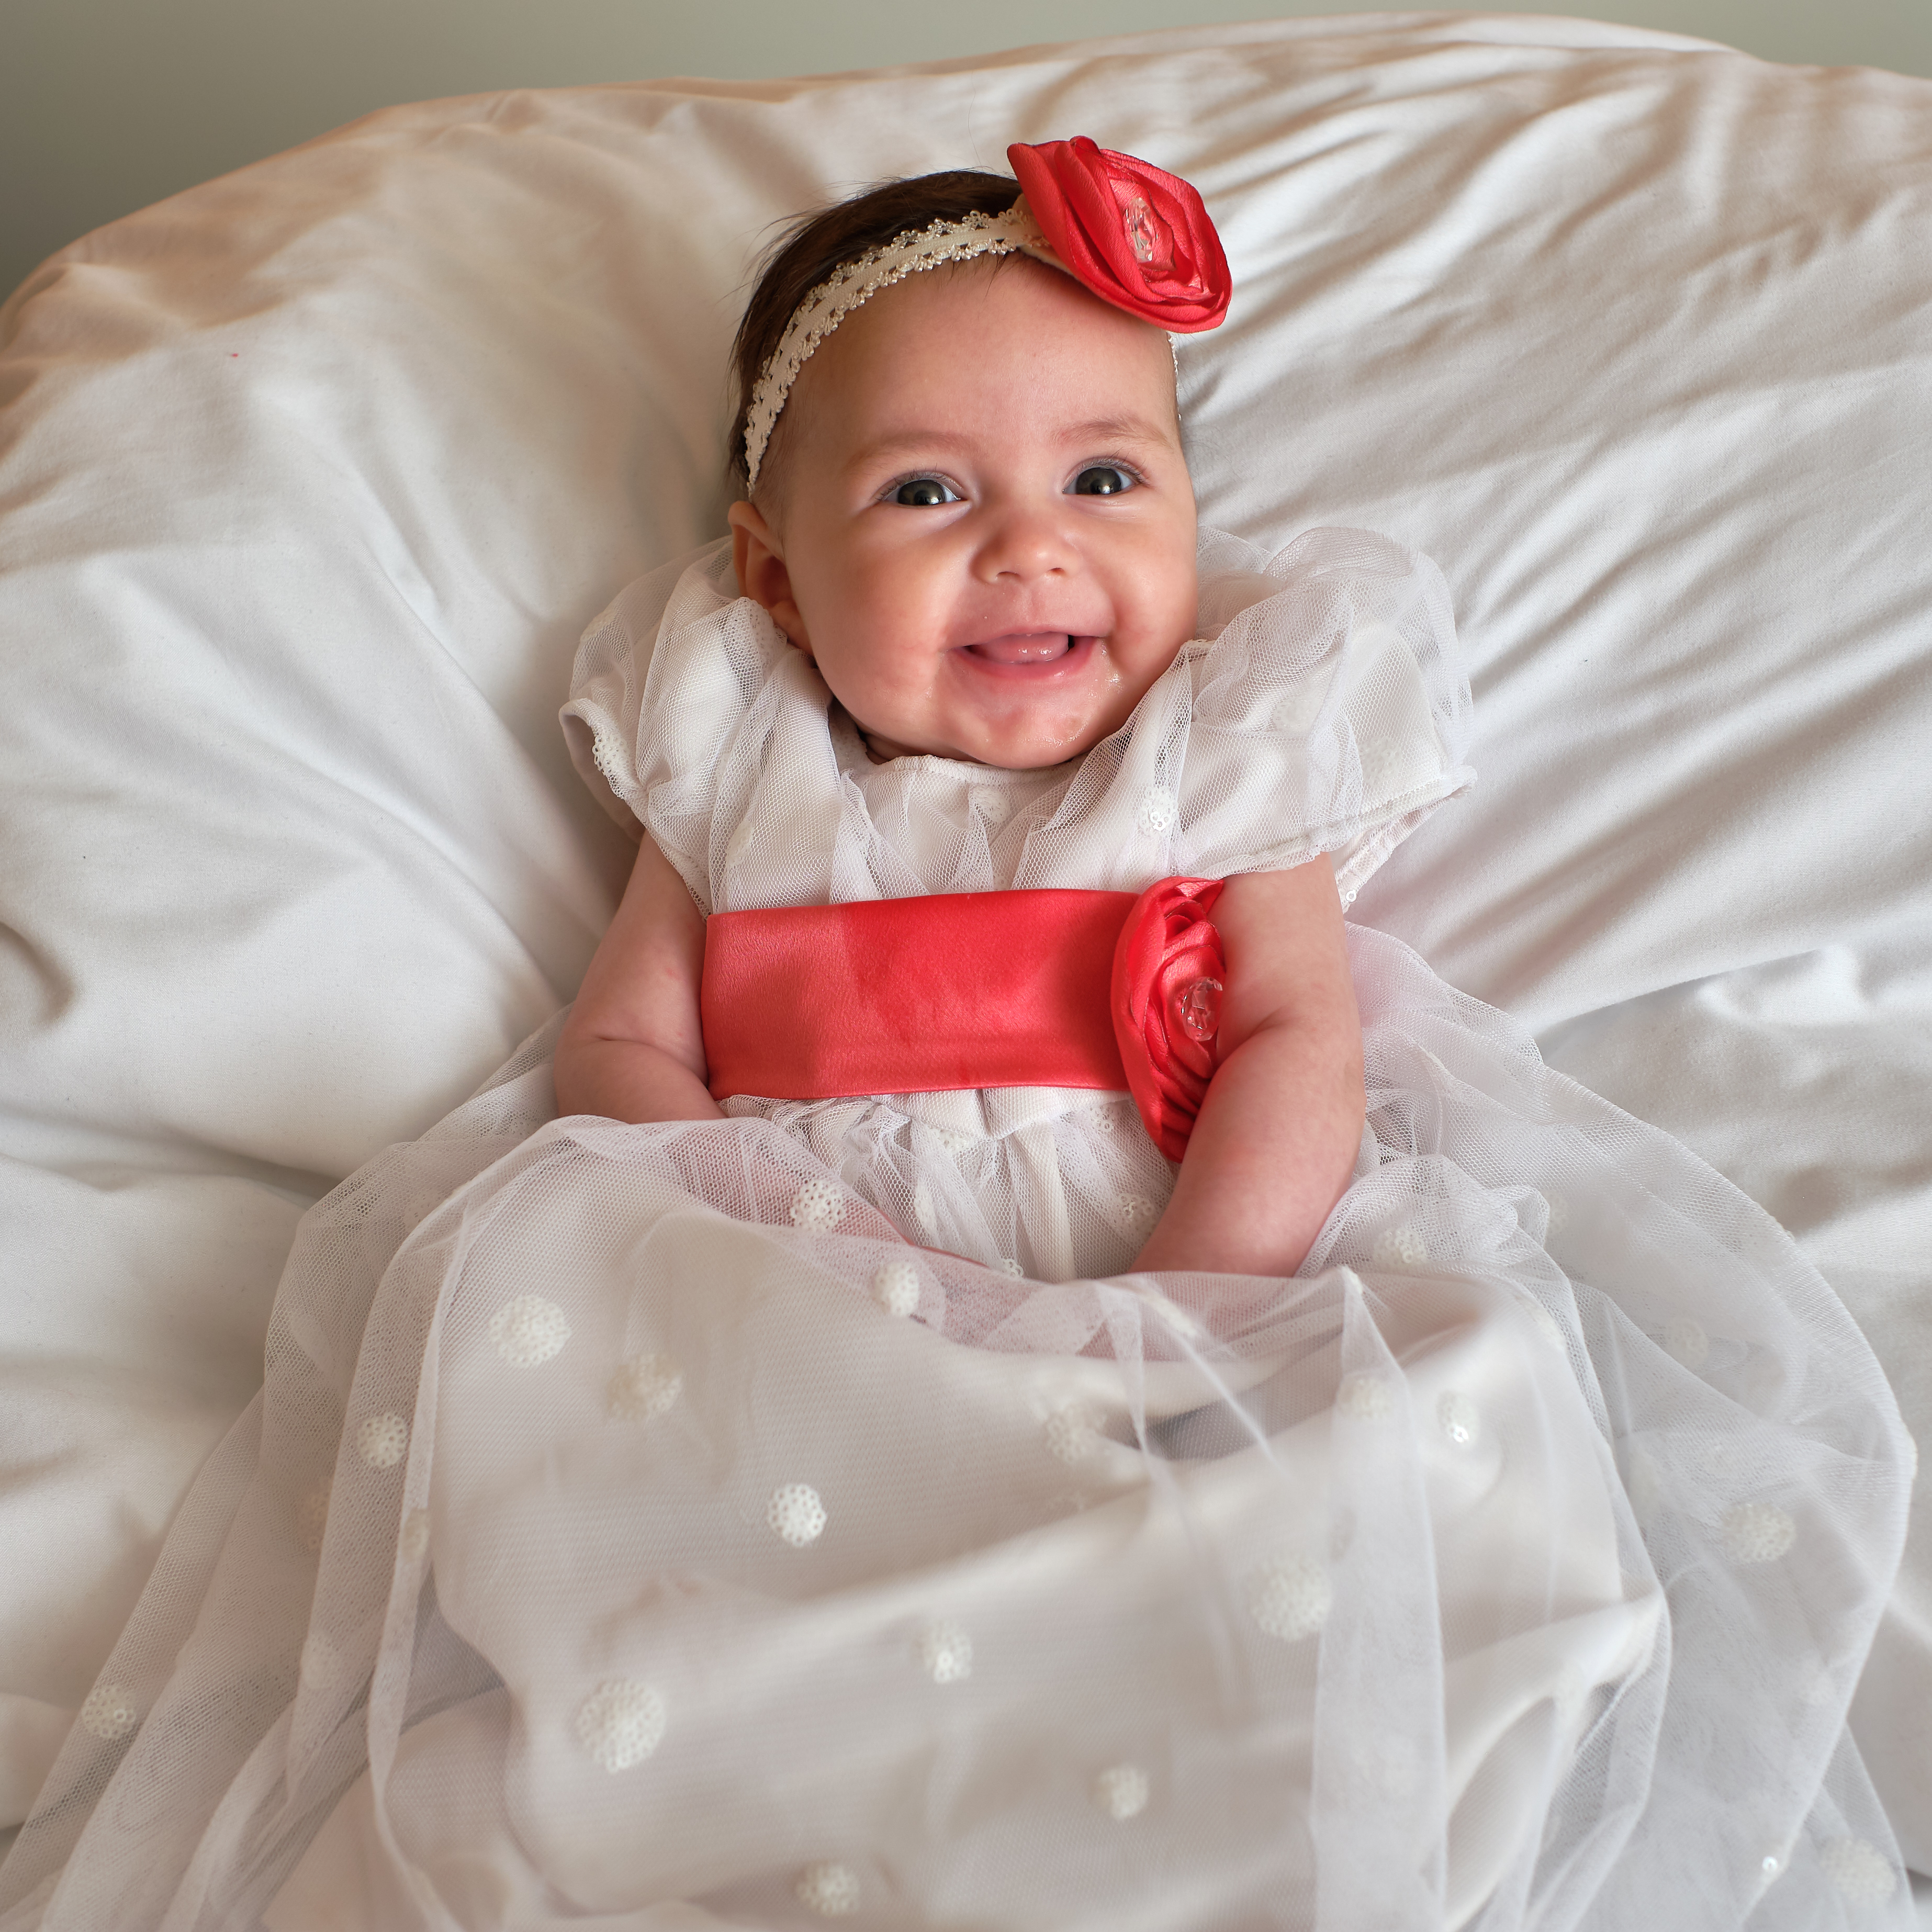 Baby Emily in a long white dress with a red sash and a red bow in her hair